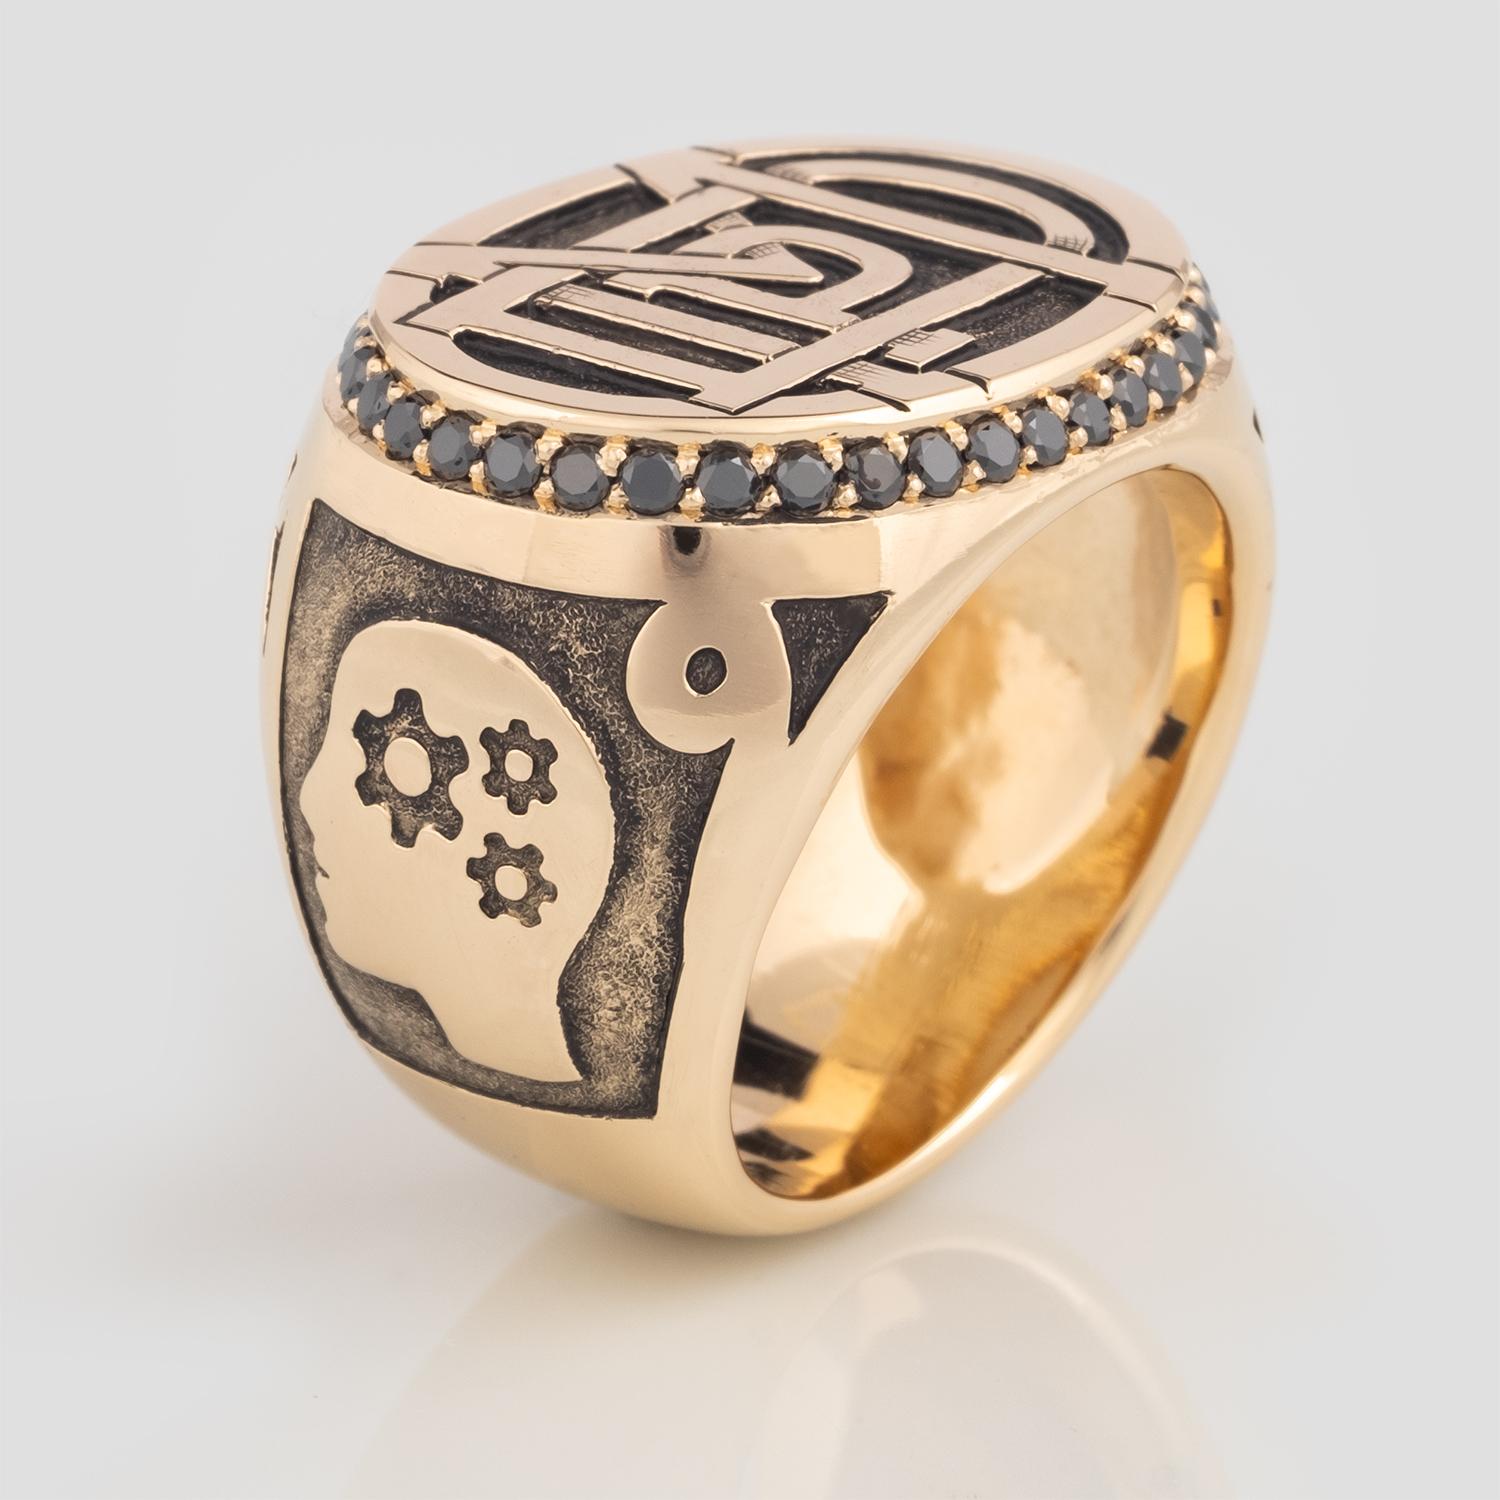 For Sale:  Commission a Personalized Monogram Signet Ring 4